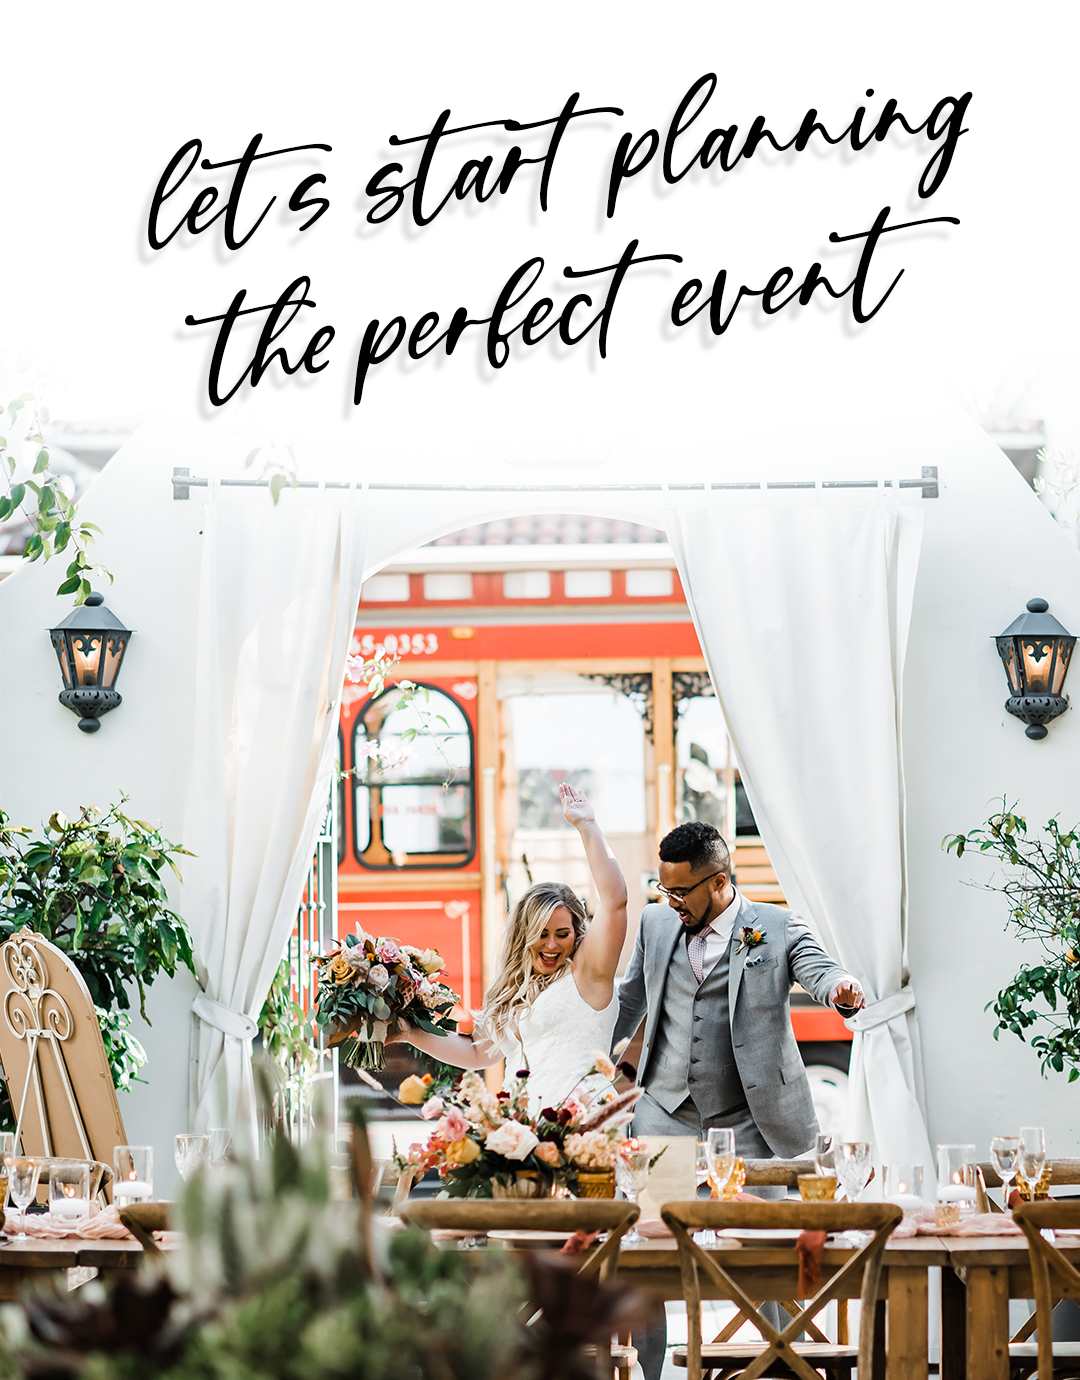 Planning the perfect event 2